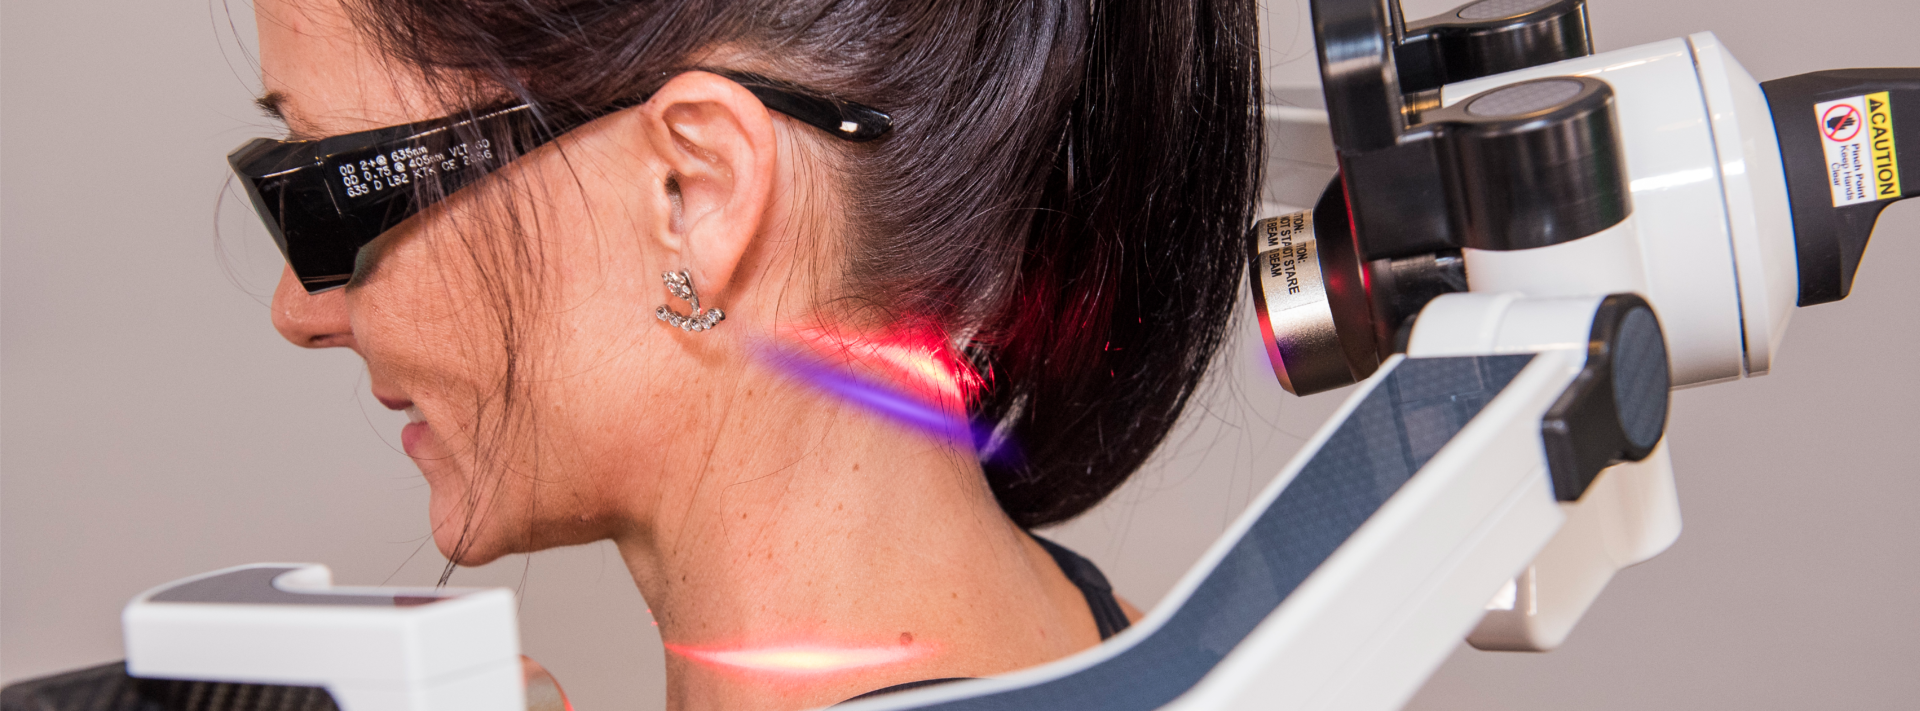 laser therapy treatment for neck pain